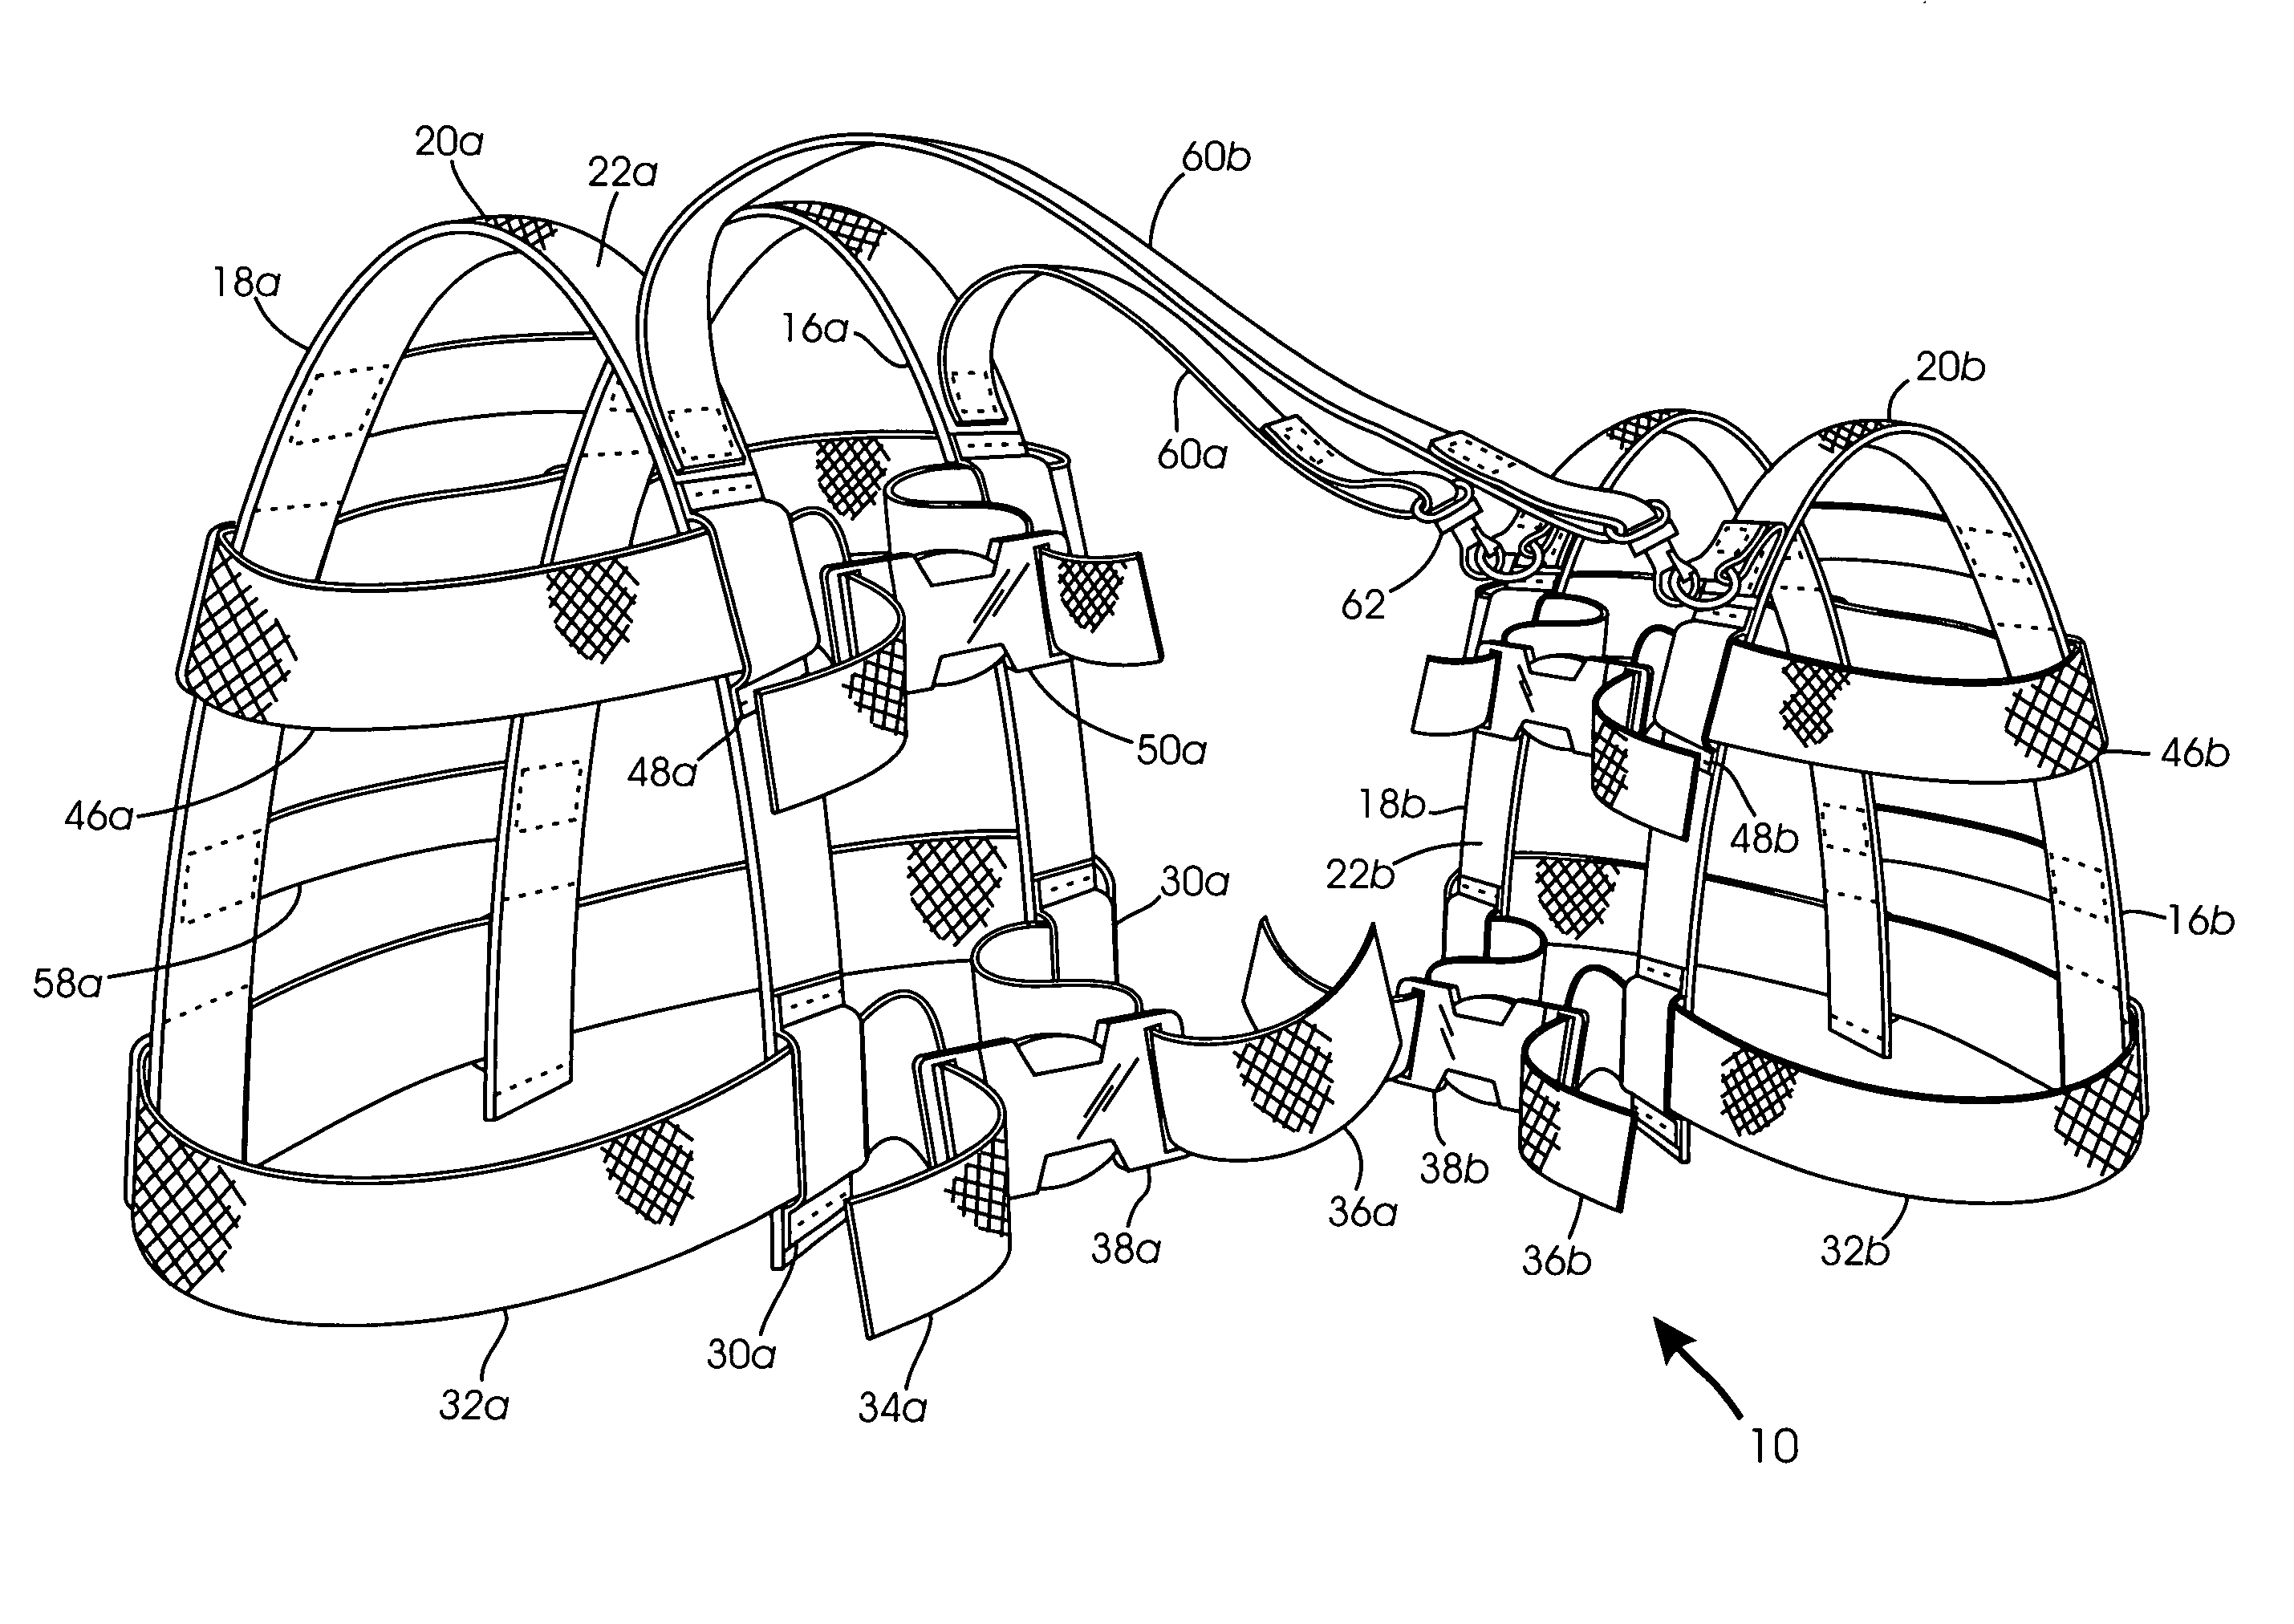 Multipurpose harness assembly for use in assisting a muscular-incapacitated person